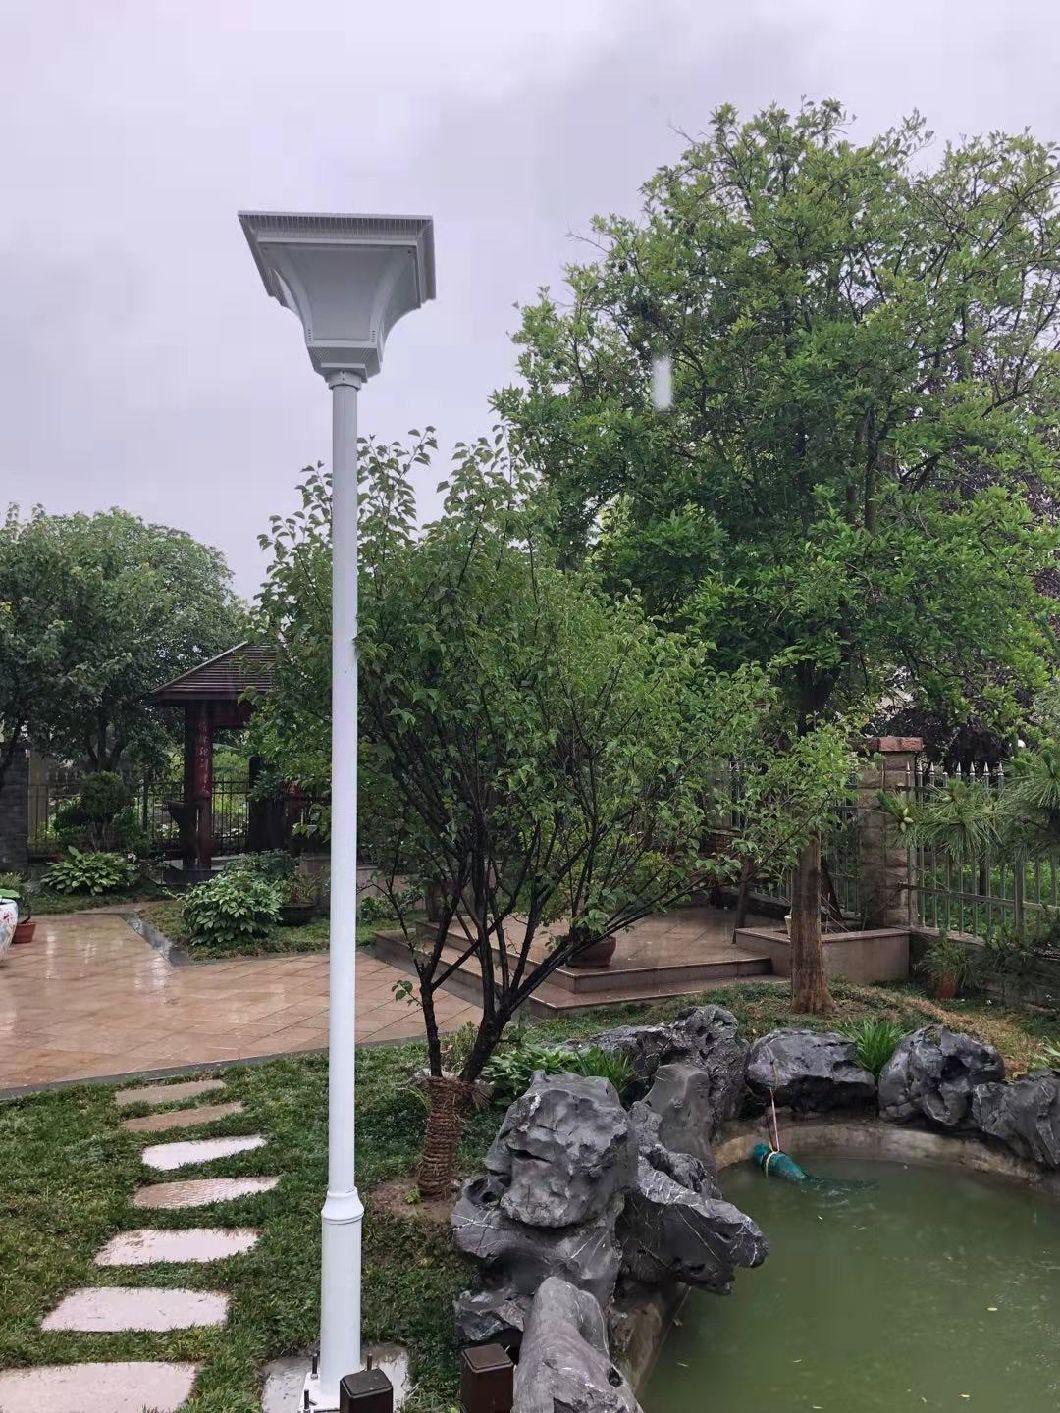 IP66 Waterproof 50W Outdoor All in One Solar Street Garden Decoration Light LED Lamp Lights Lighting Energy Saving Power System Home